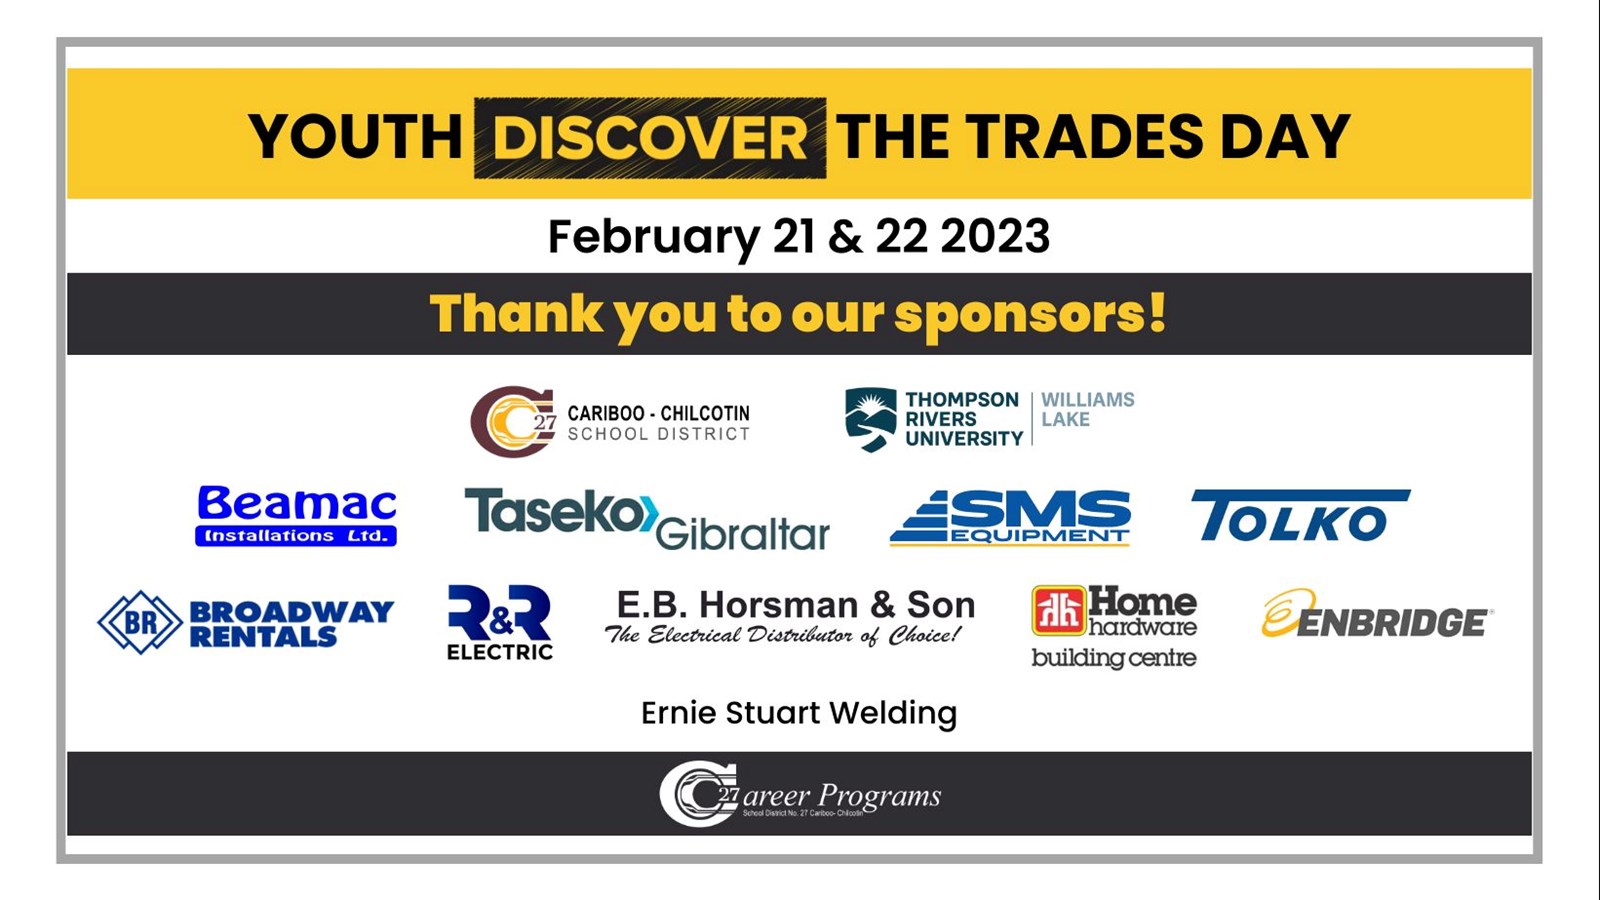 Thank you to our Youth Discover the Trades Day sponsors!